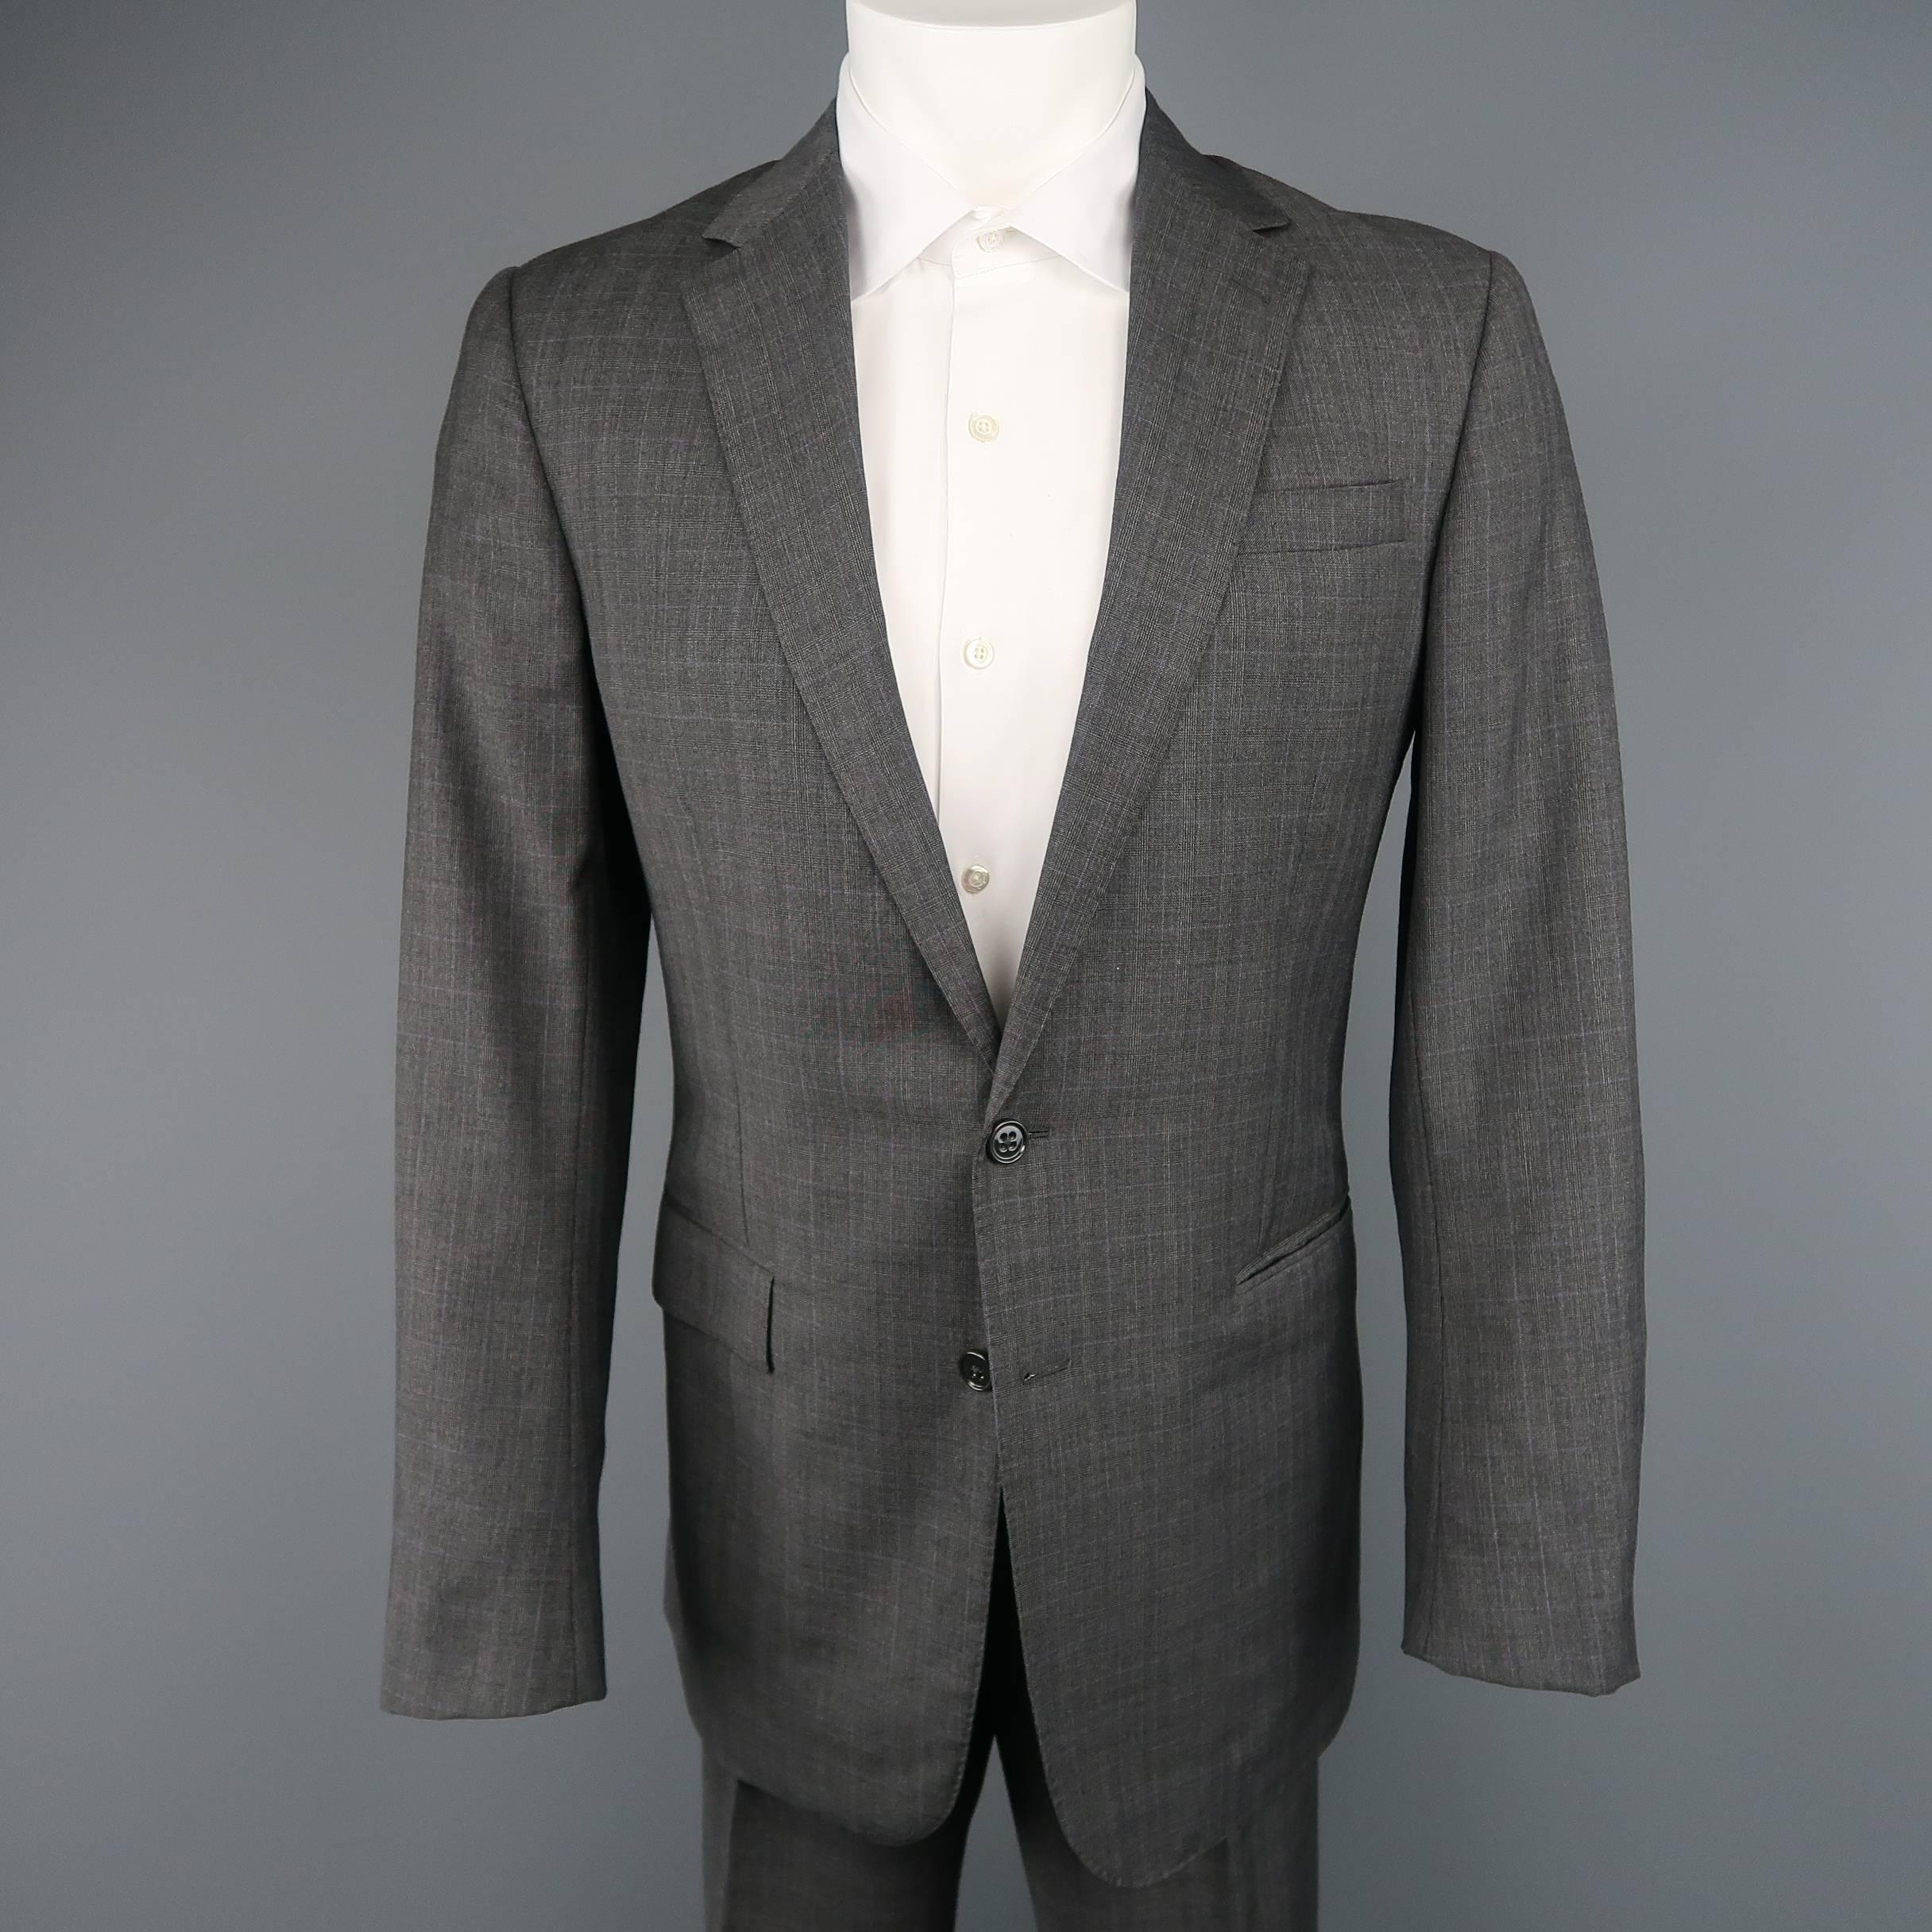 Two piece suit by RALPH LAUREN BLACK LABEL comes in dark gray and lavender glenplaid  wool and includes a single breasted two button sport coat with notch lapel and matching flat front trousers with side tabs.  Made in Italy.
 
Excellent Pre-Owned